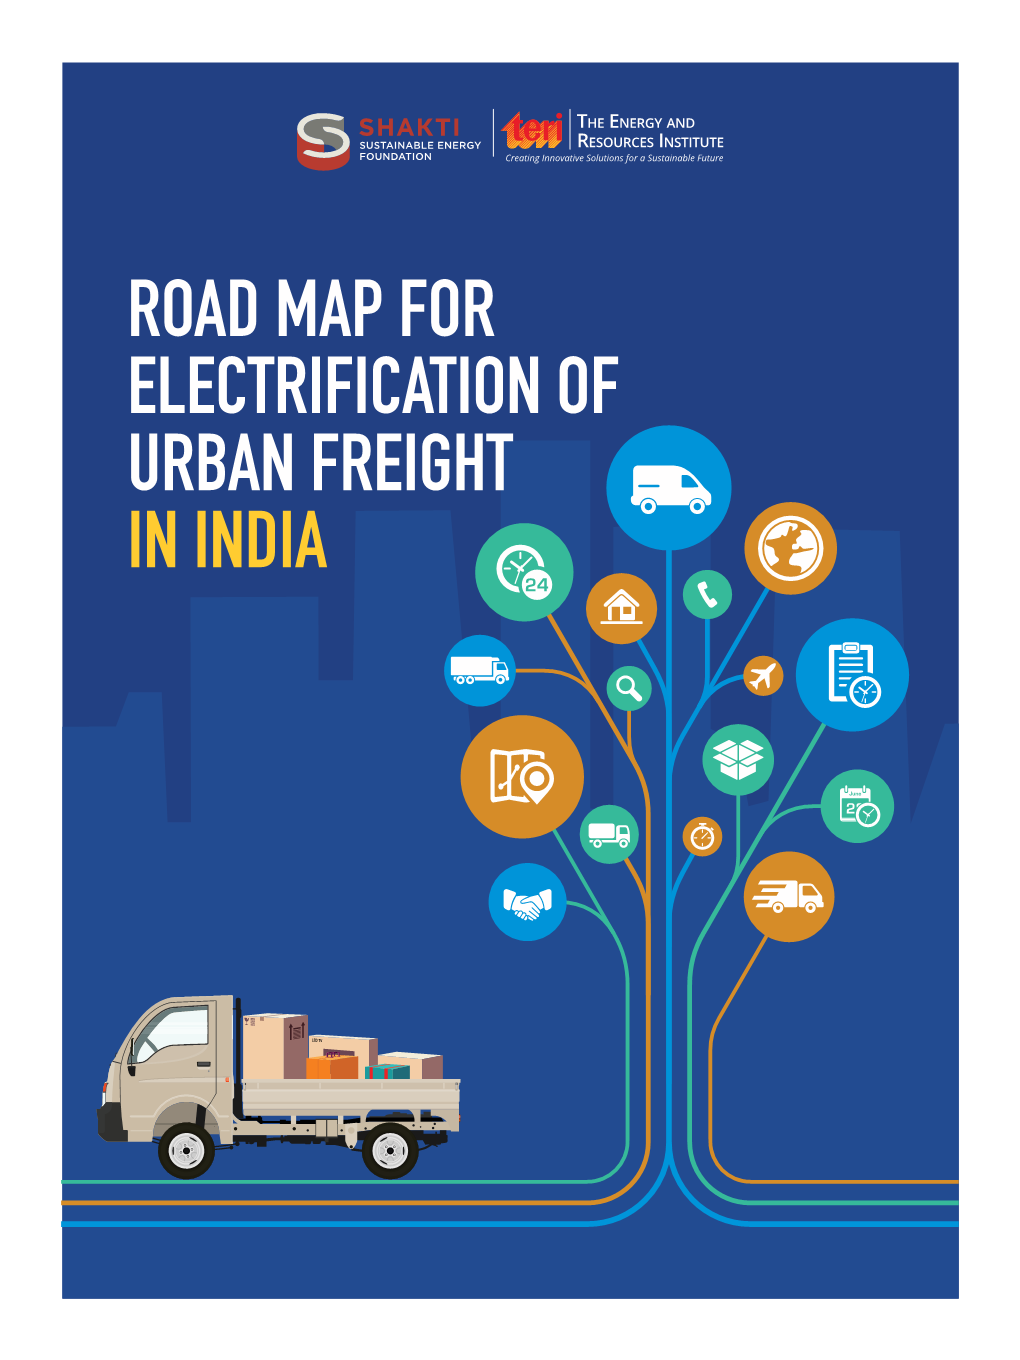 Road Map for Electrification of Urban Freight